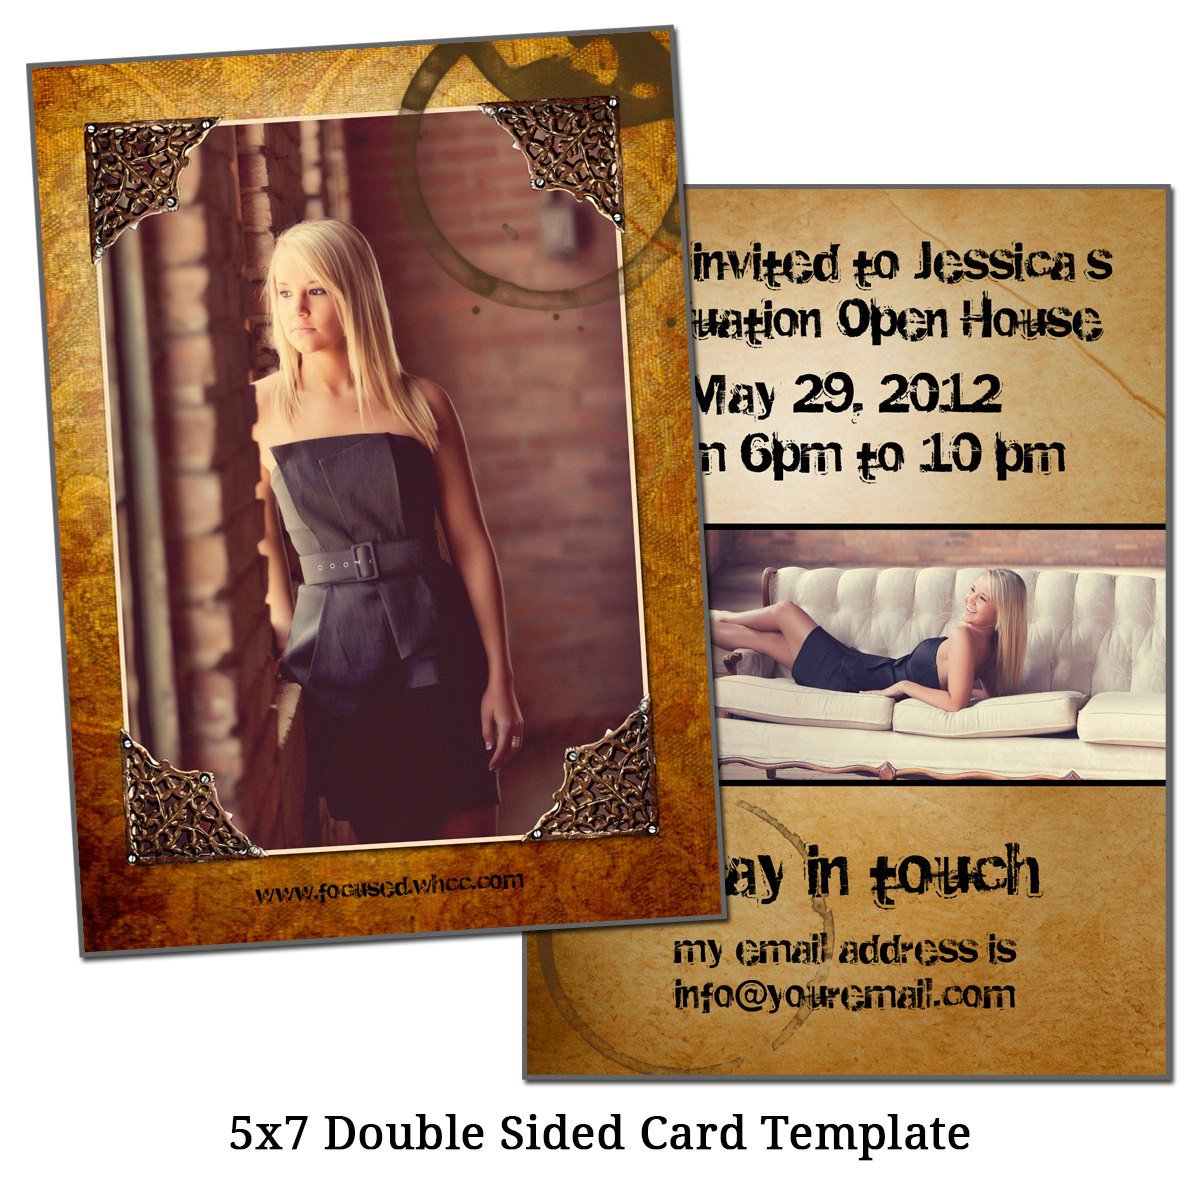 5x7 Double Sided Card Template FRAMED FUTURE by